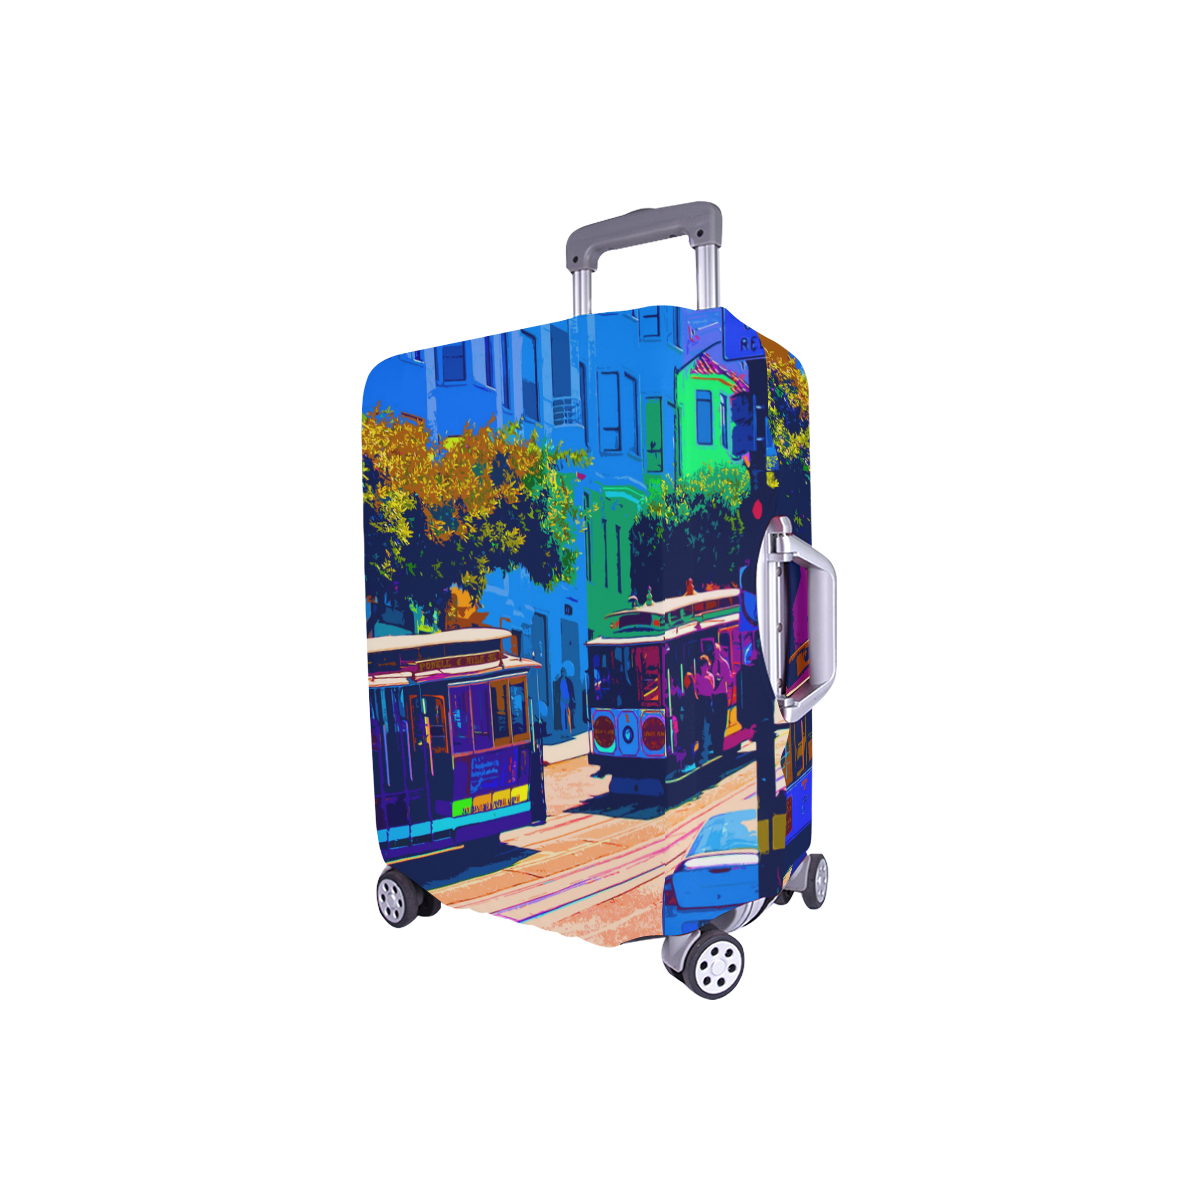 SanFrancisco_20170112_by_JAMColors Luggage Cover/Small 18"-21"